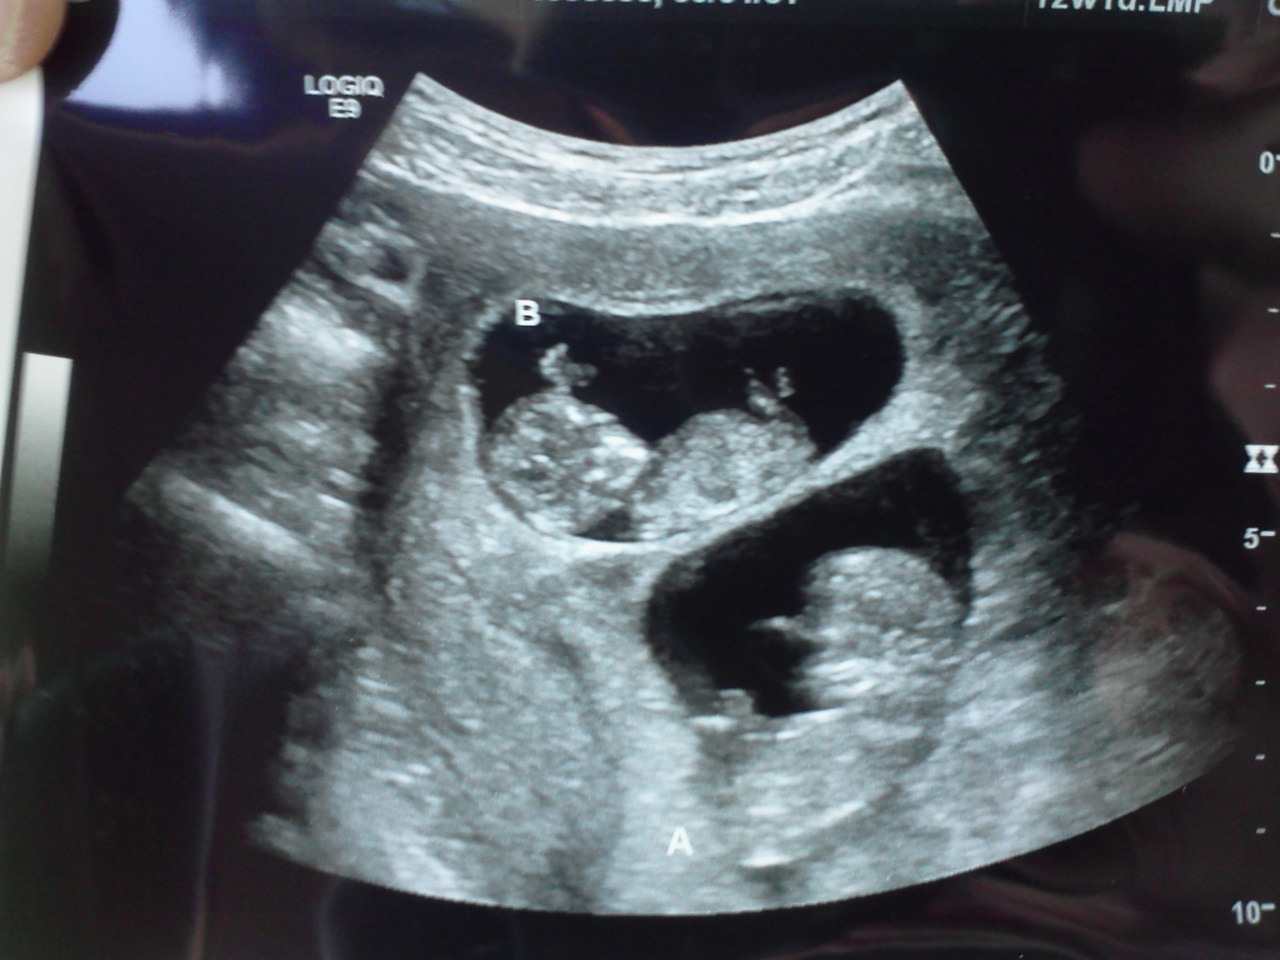 The Hart Family: 11 Week Ultrasound and Graduation Day!